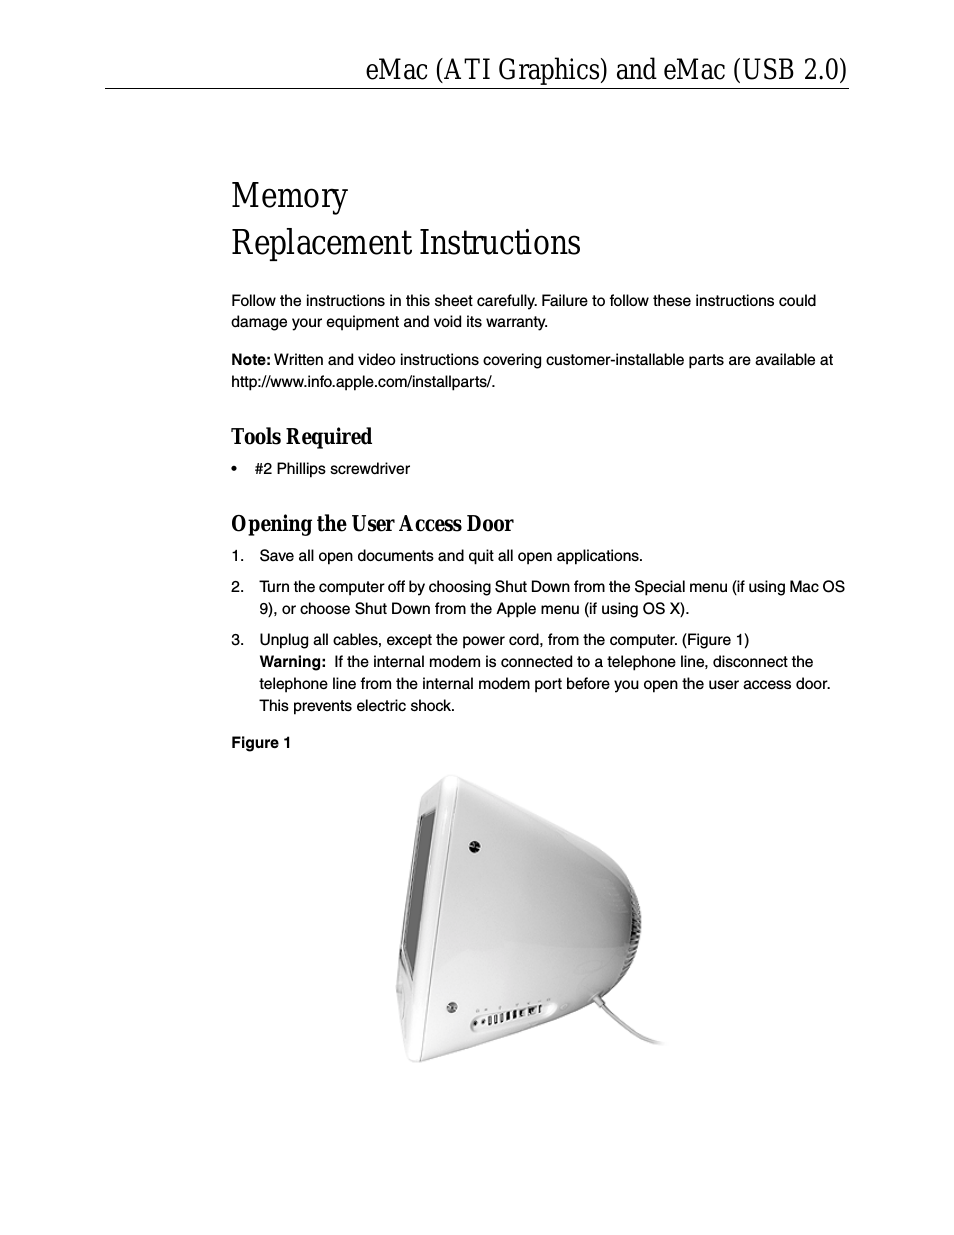 eMac ATI Graphics (Memory Replacement) (Page 1)